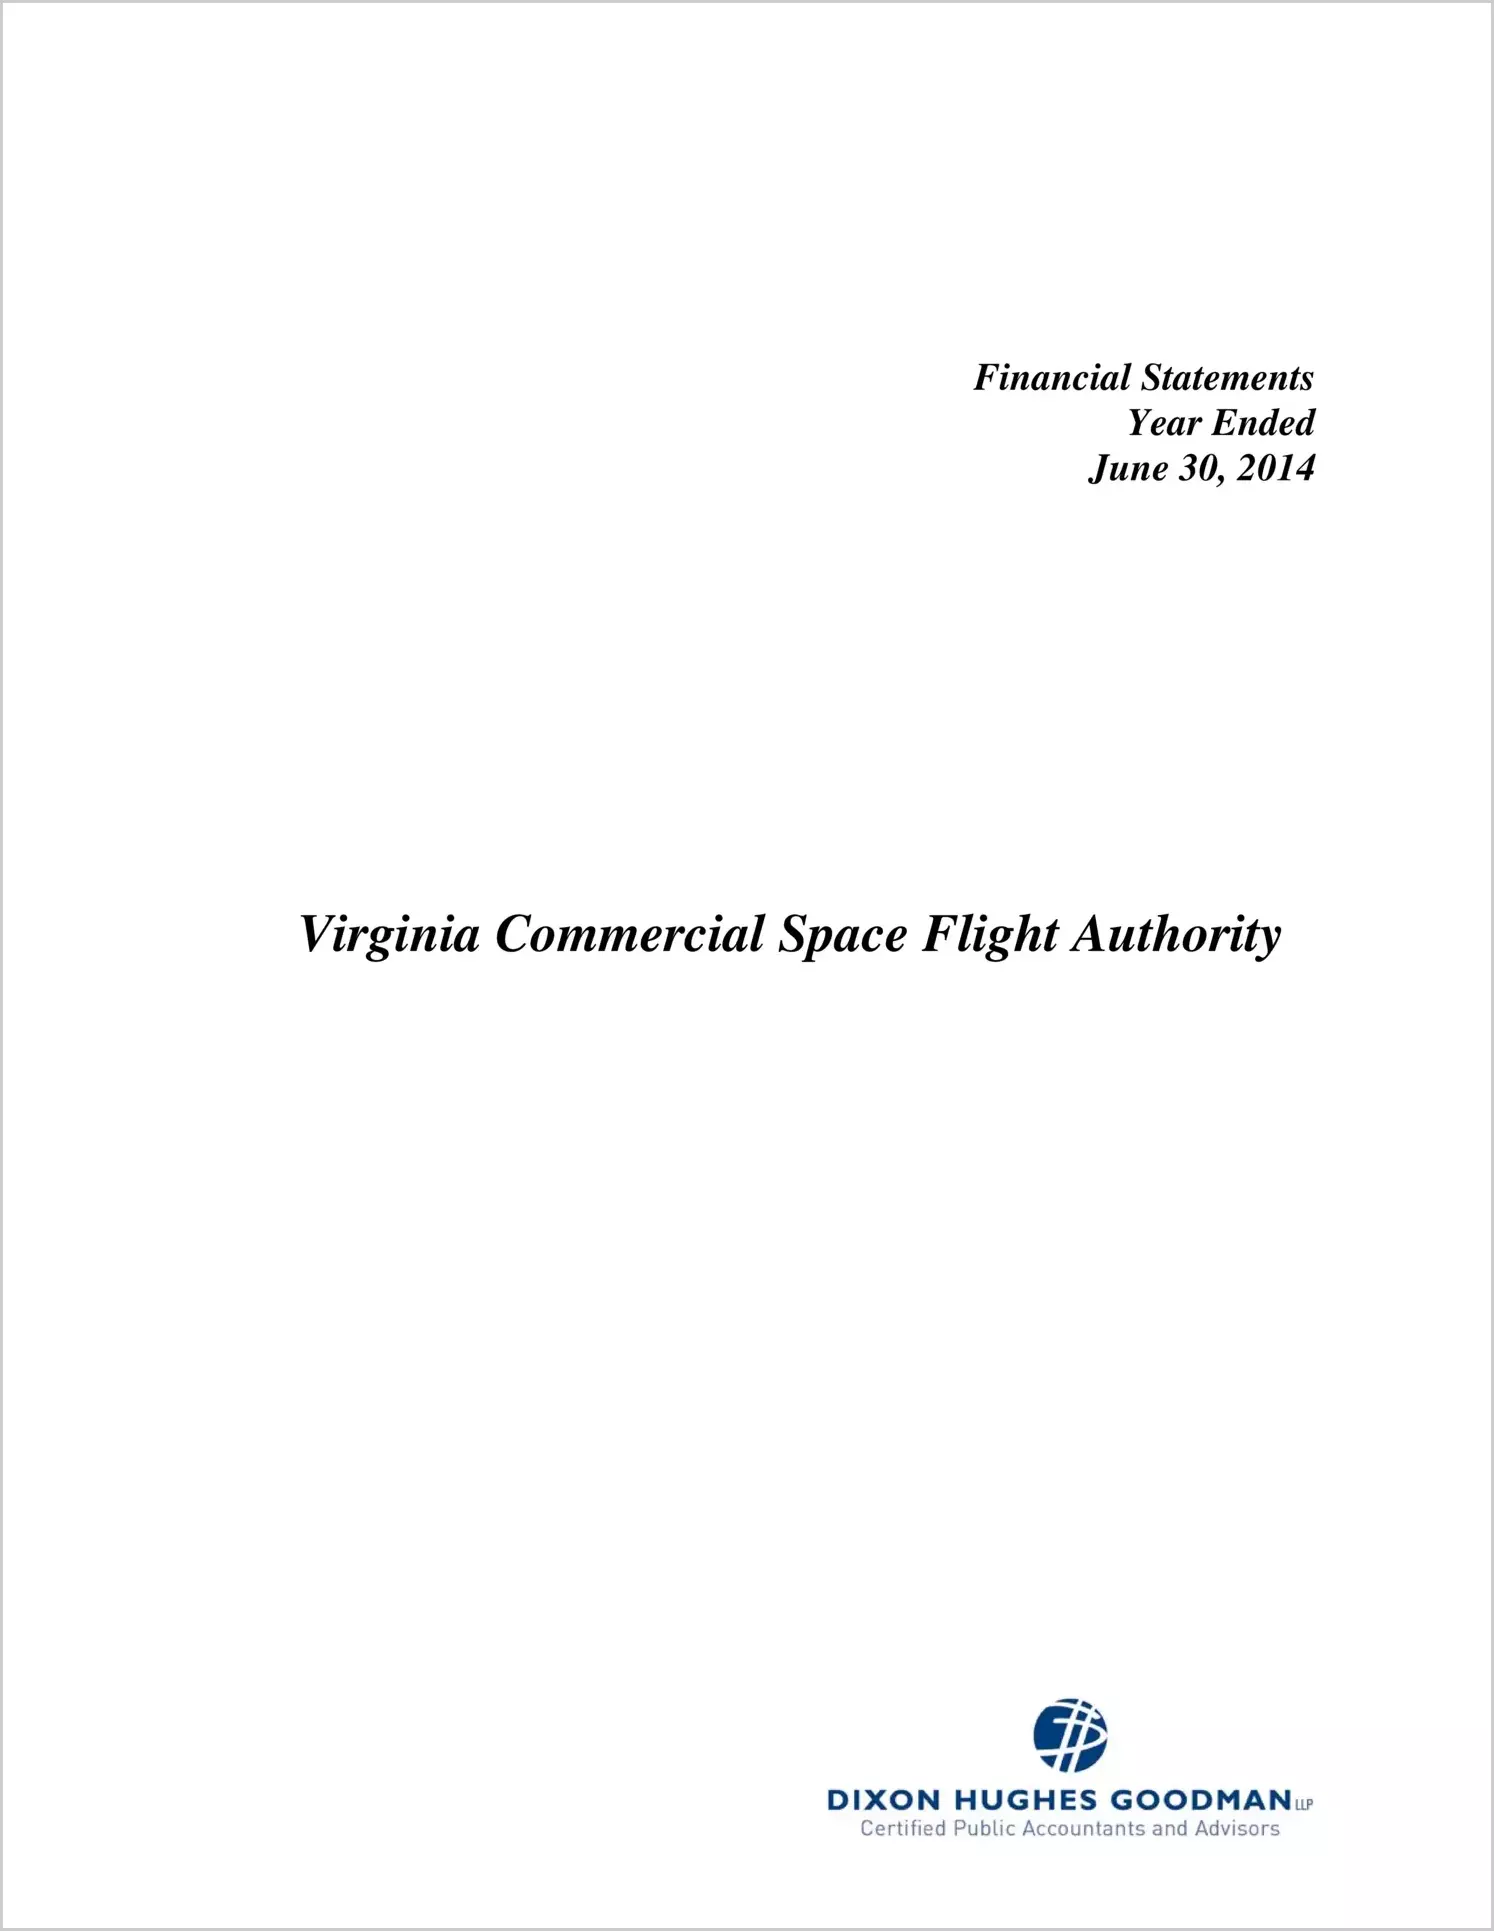 Virginia Commercial Space Flight Authority Financial Statements Report for the year ended June 30, 2014